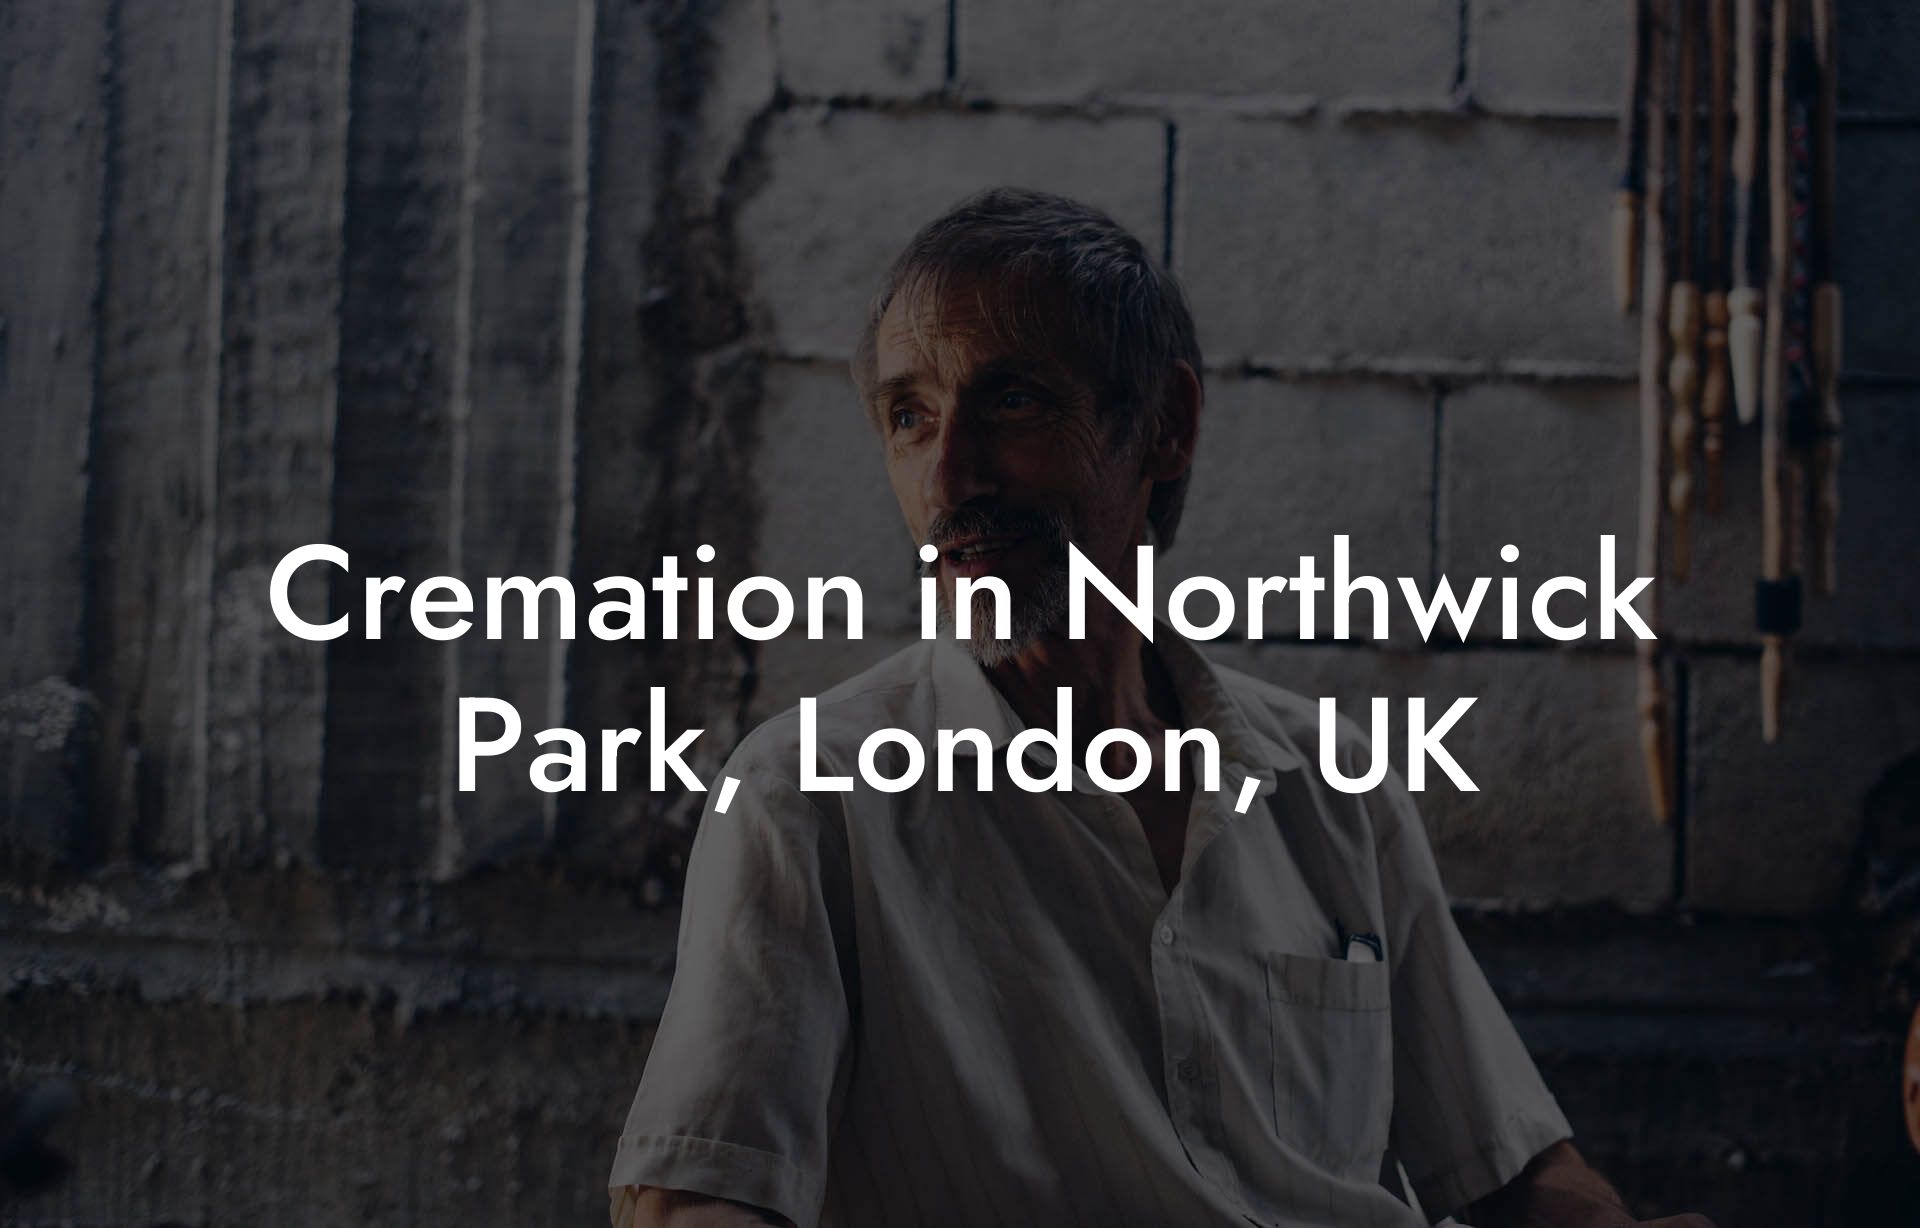 Cremation in Northwick Park, London, UK